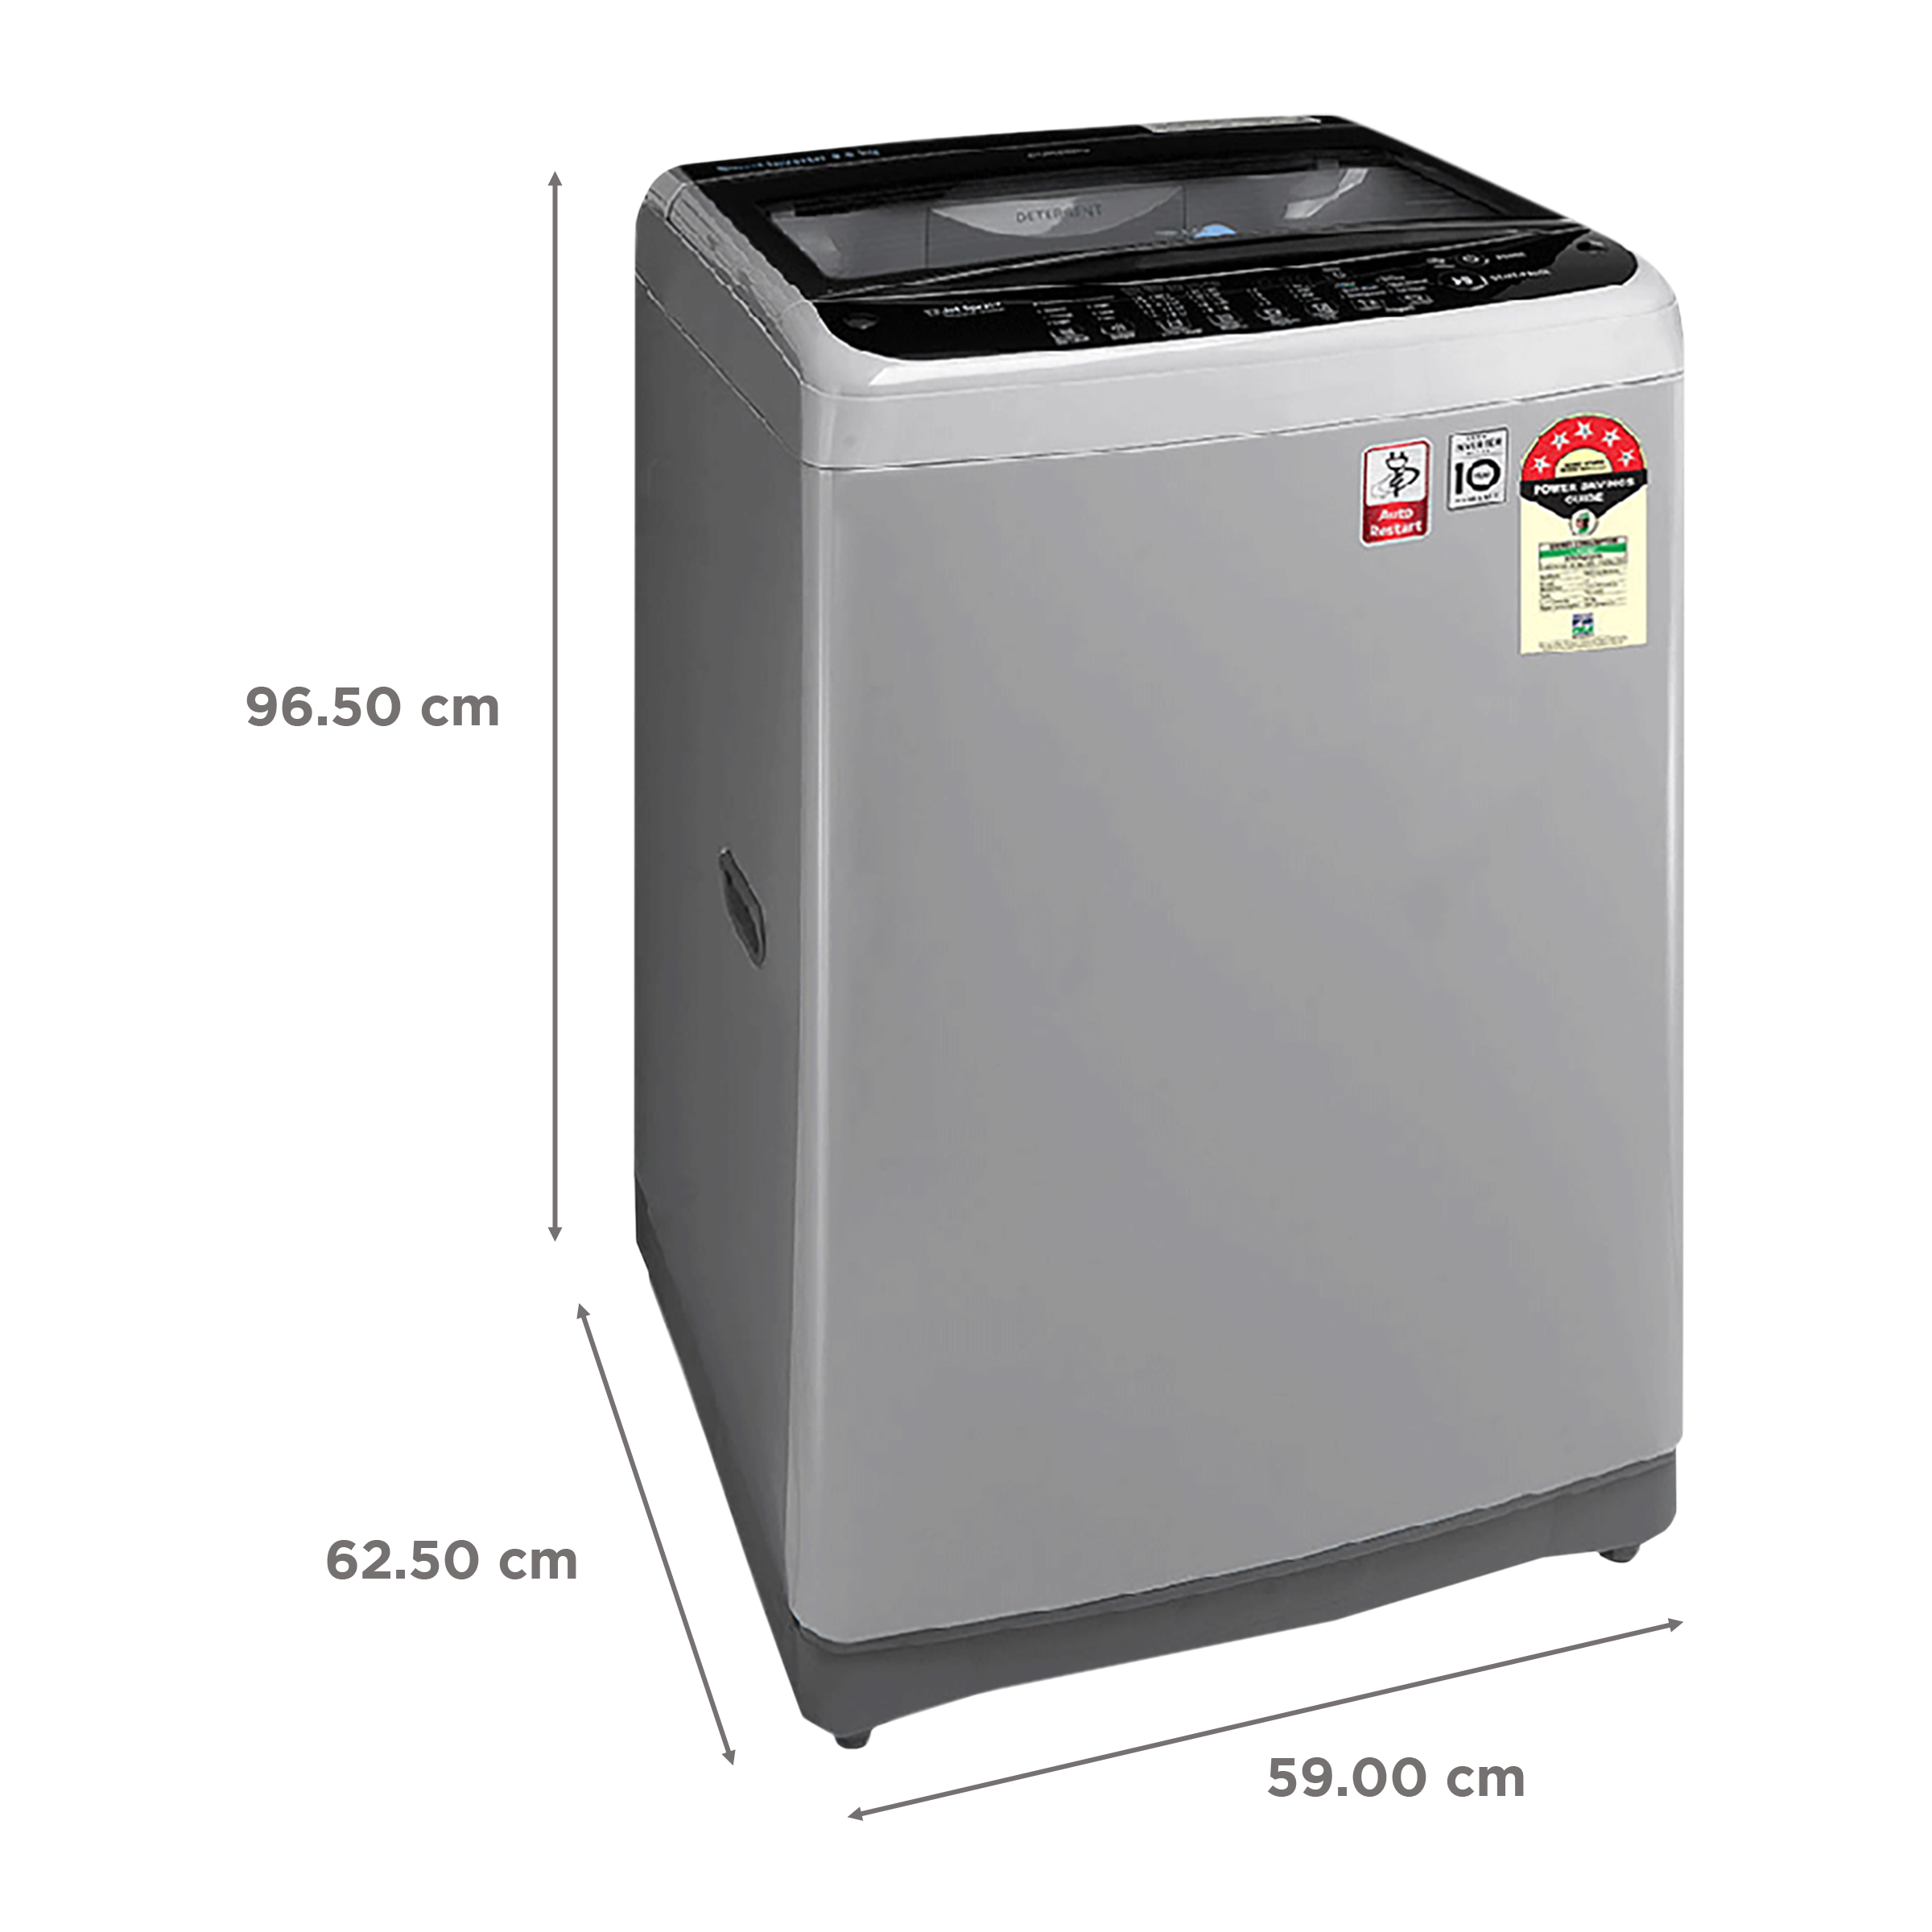 buy-lg-9-kg-5-star-inverter-fully-automatic-top-load-washing-machine